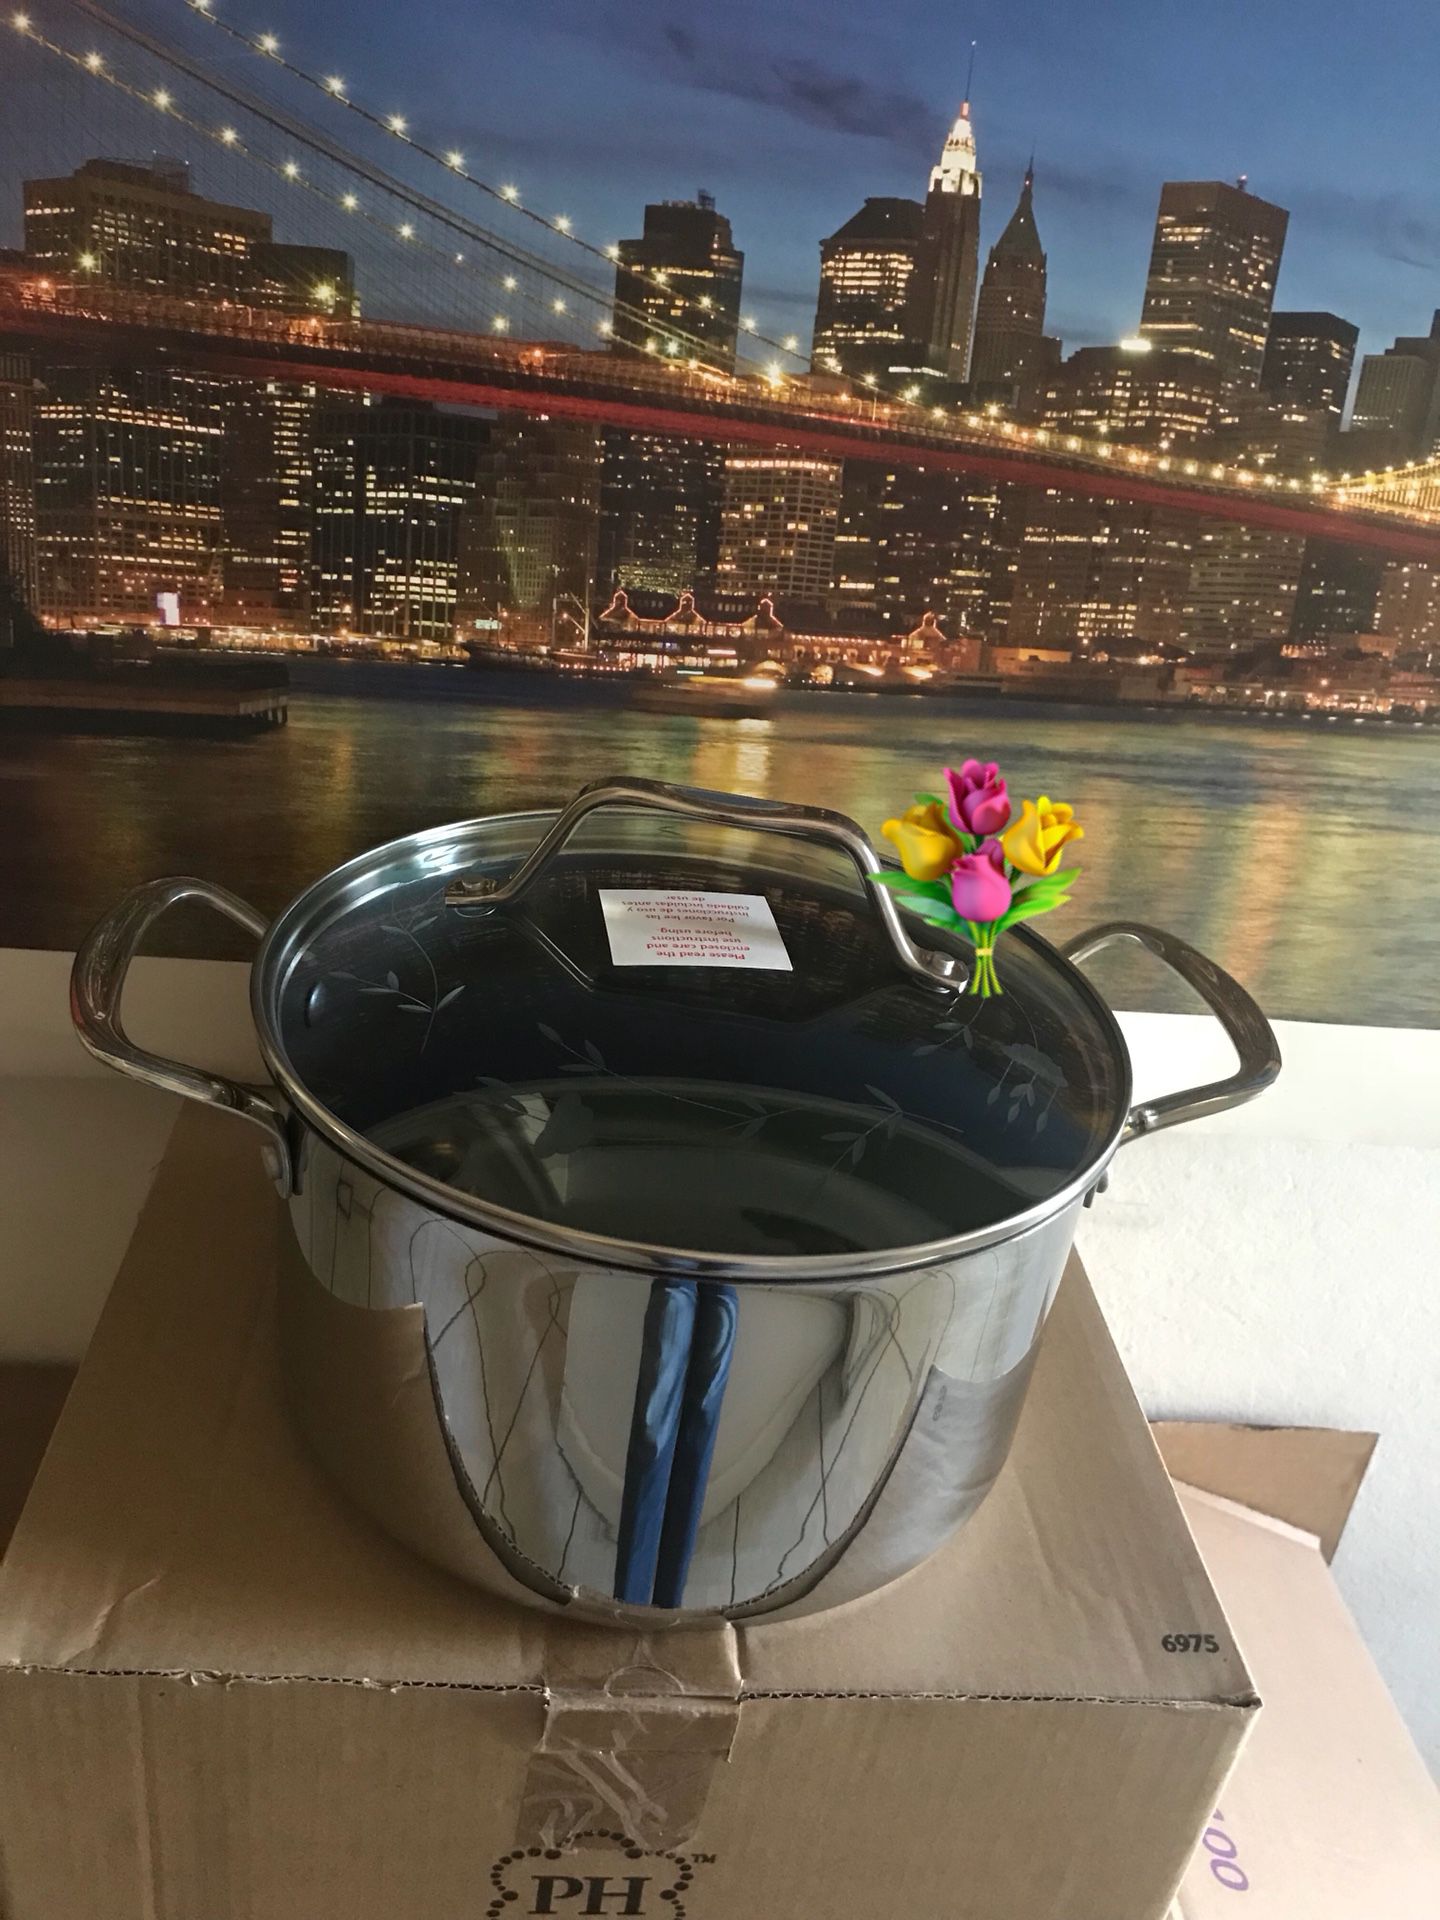 PRINCESS HOUSE OLLA ANTIADHERENTE 5Qt for Sale in Bloomington, CA - OfferUp